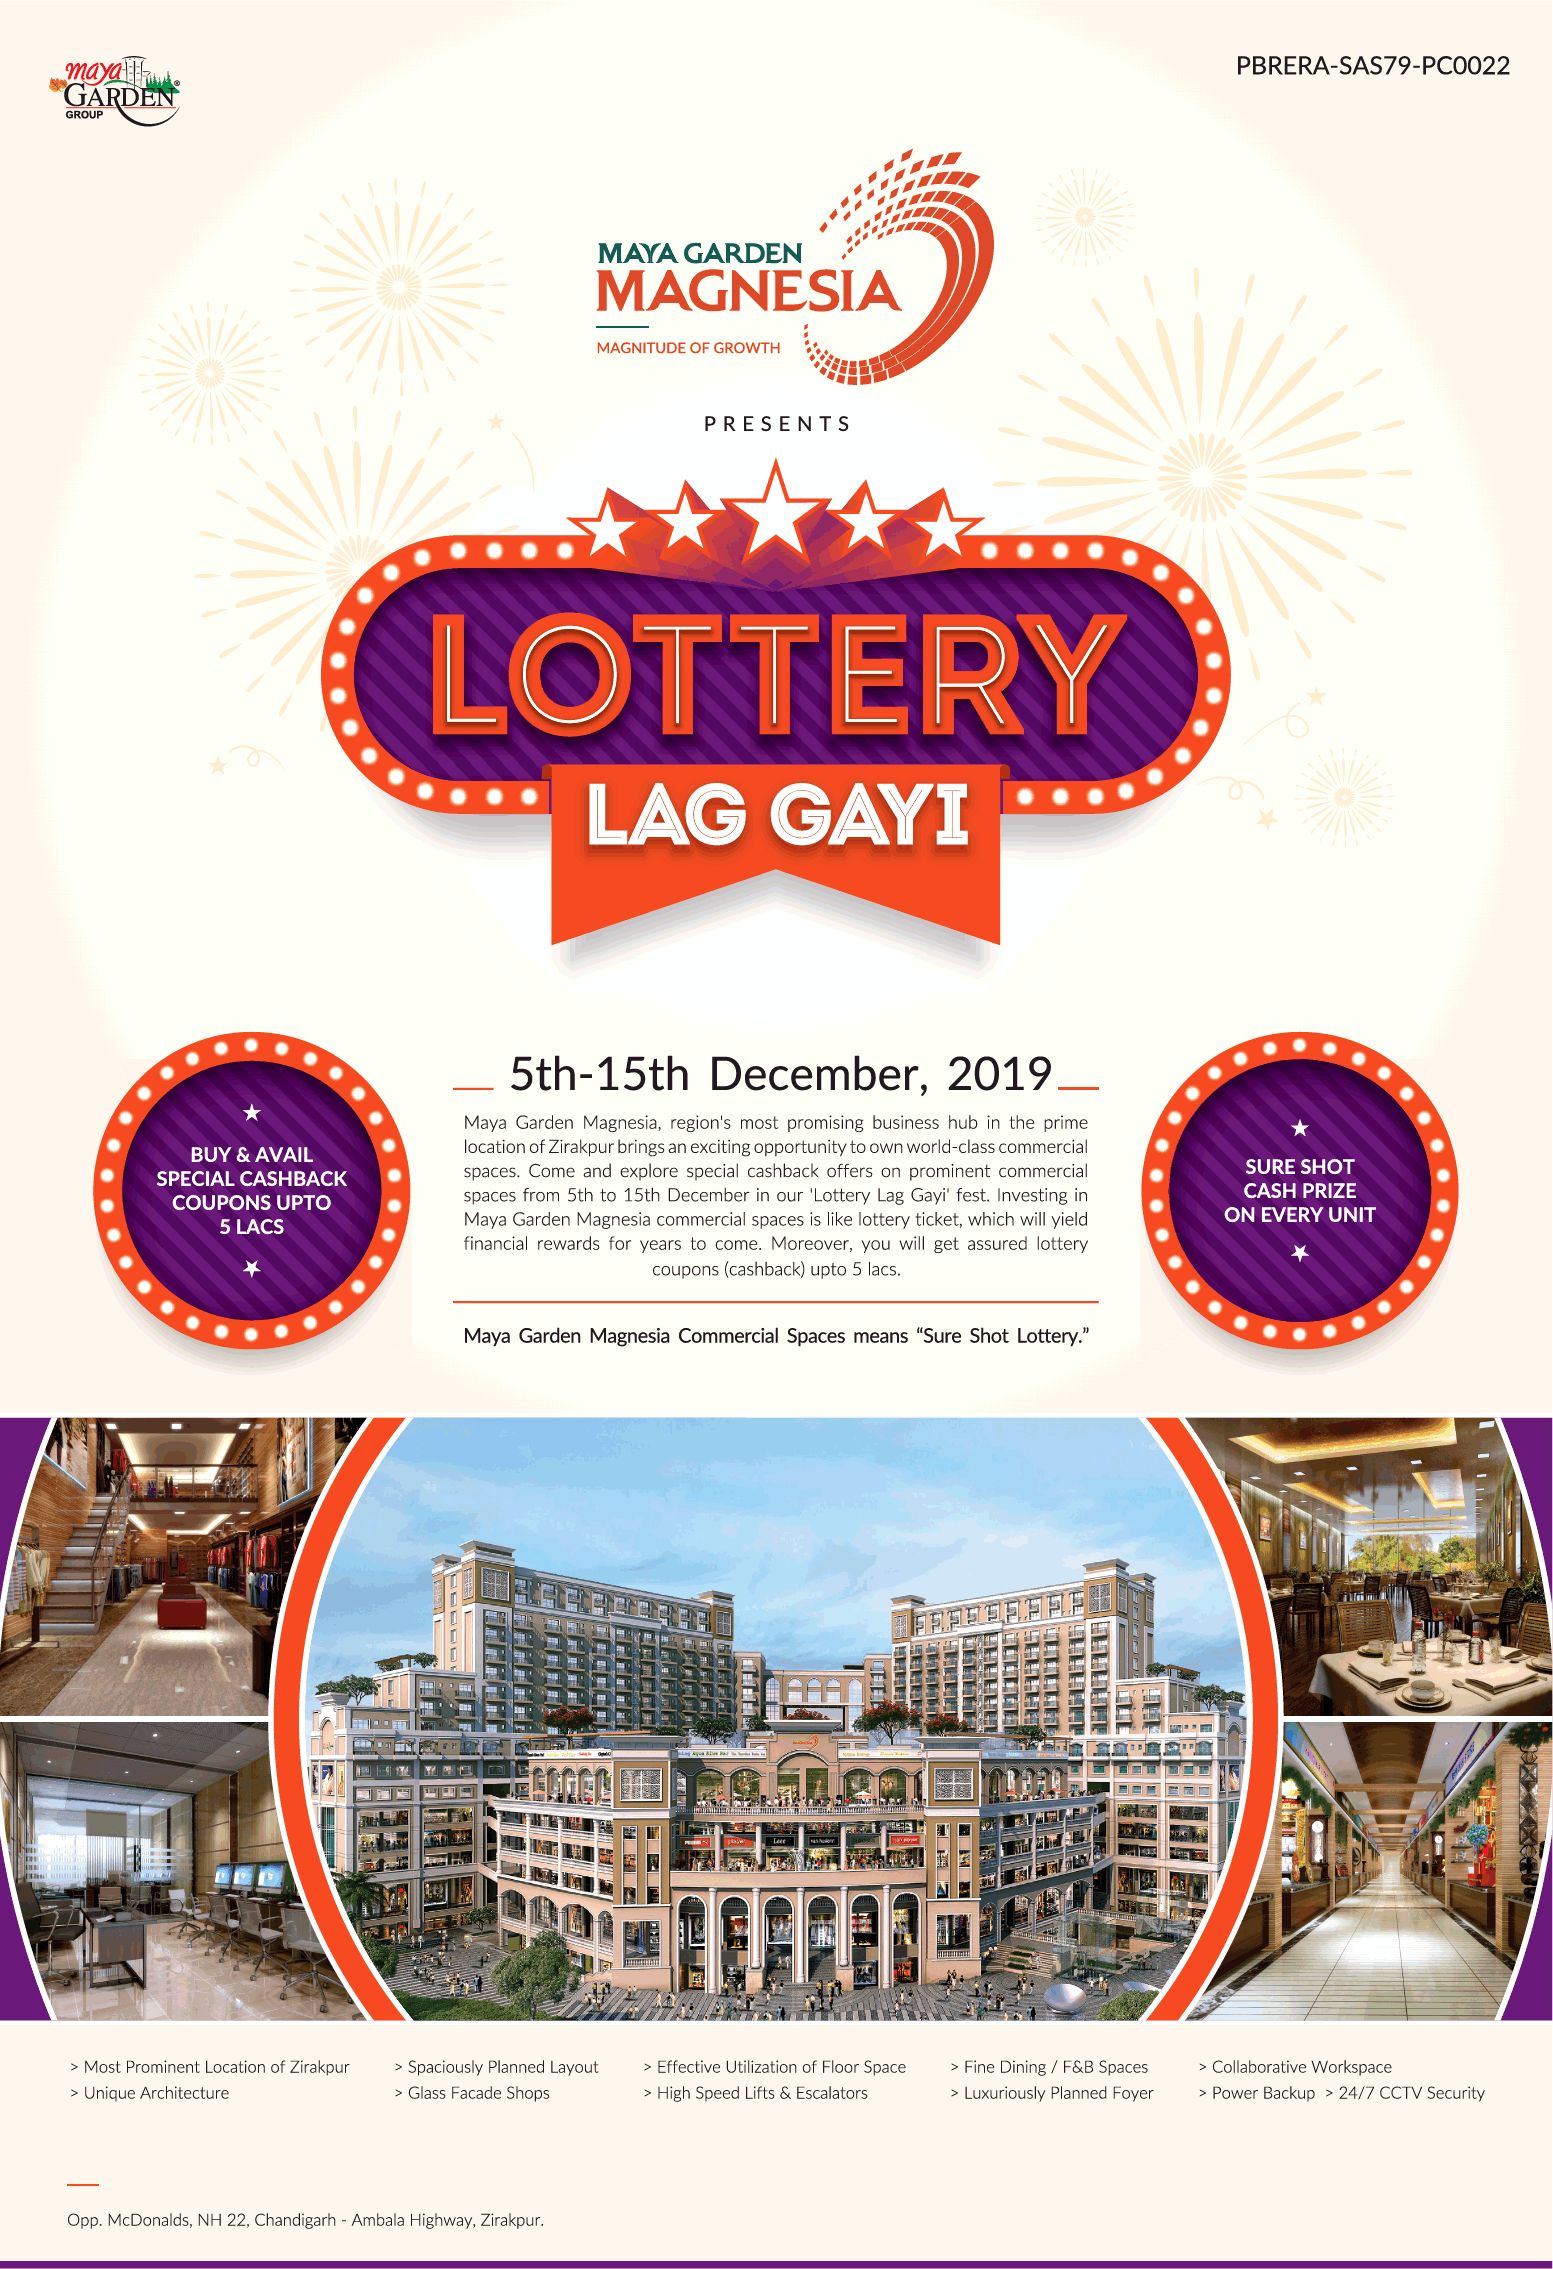 Buy & avail special cashback coupons upto 5 Lacs at Maya Garden Magnesia, Chandigarh Update